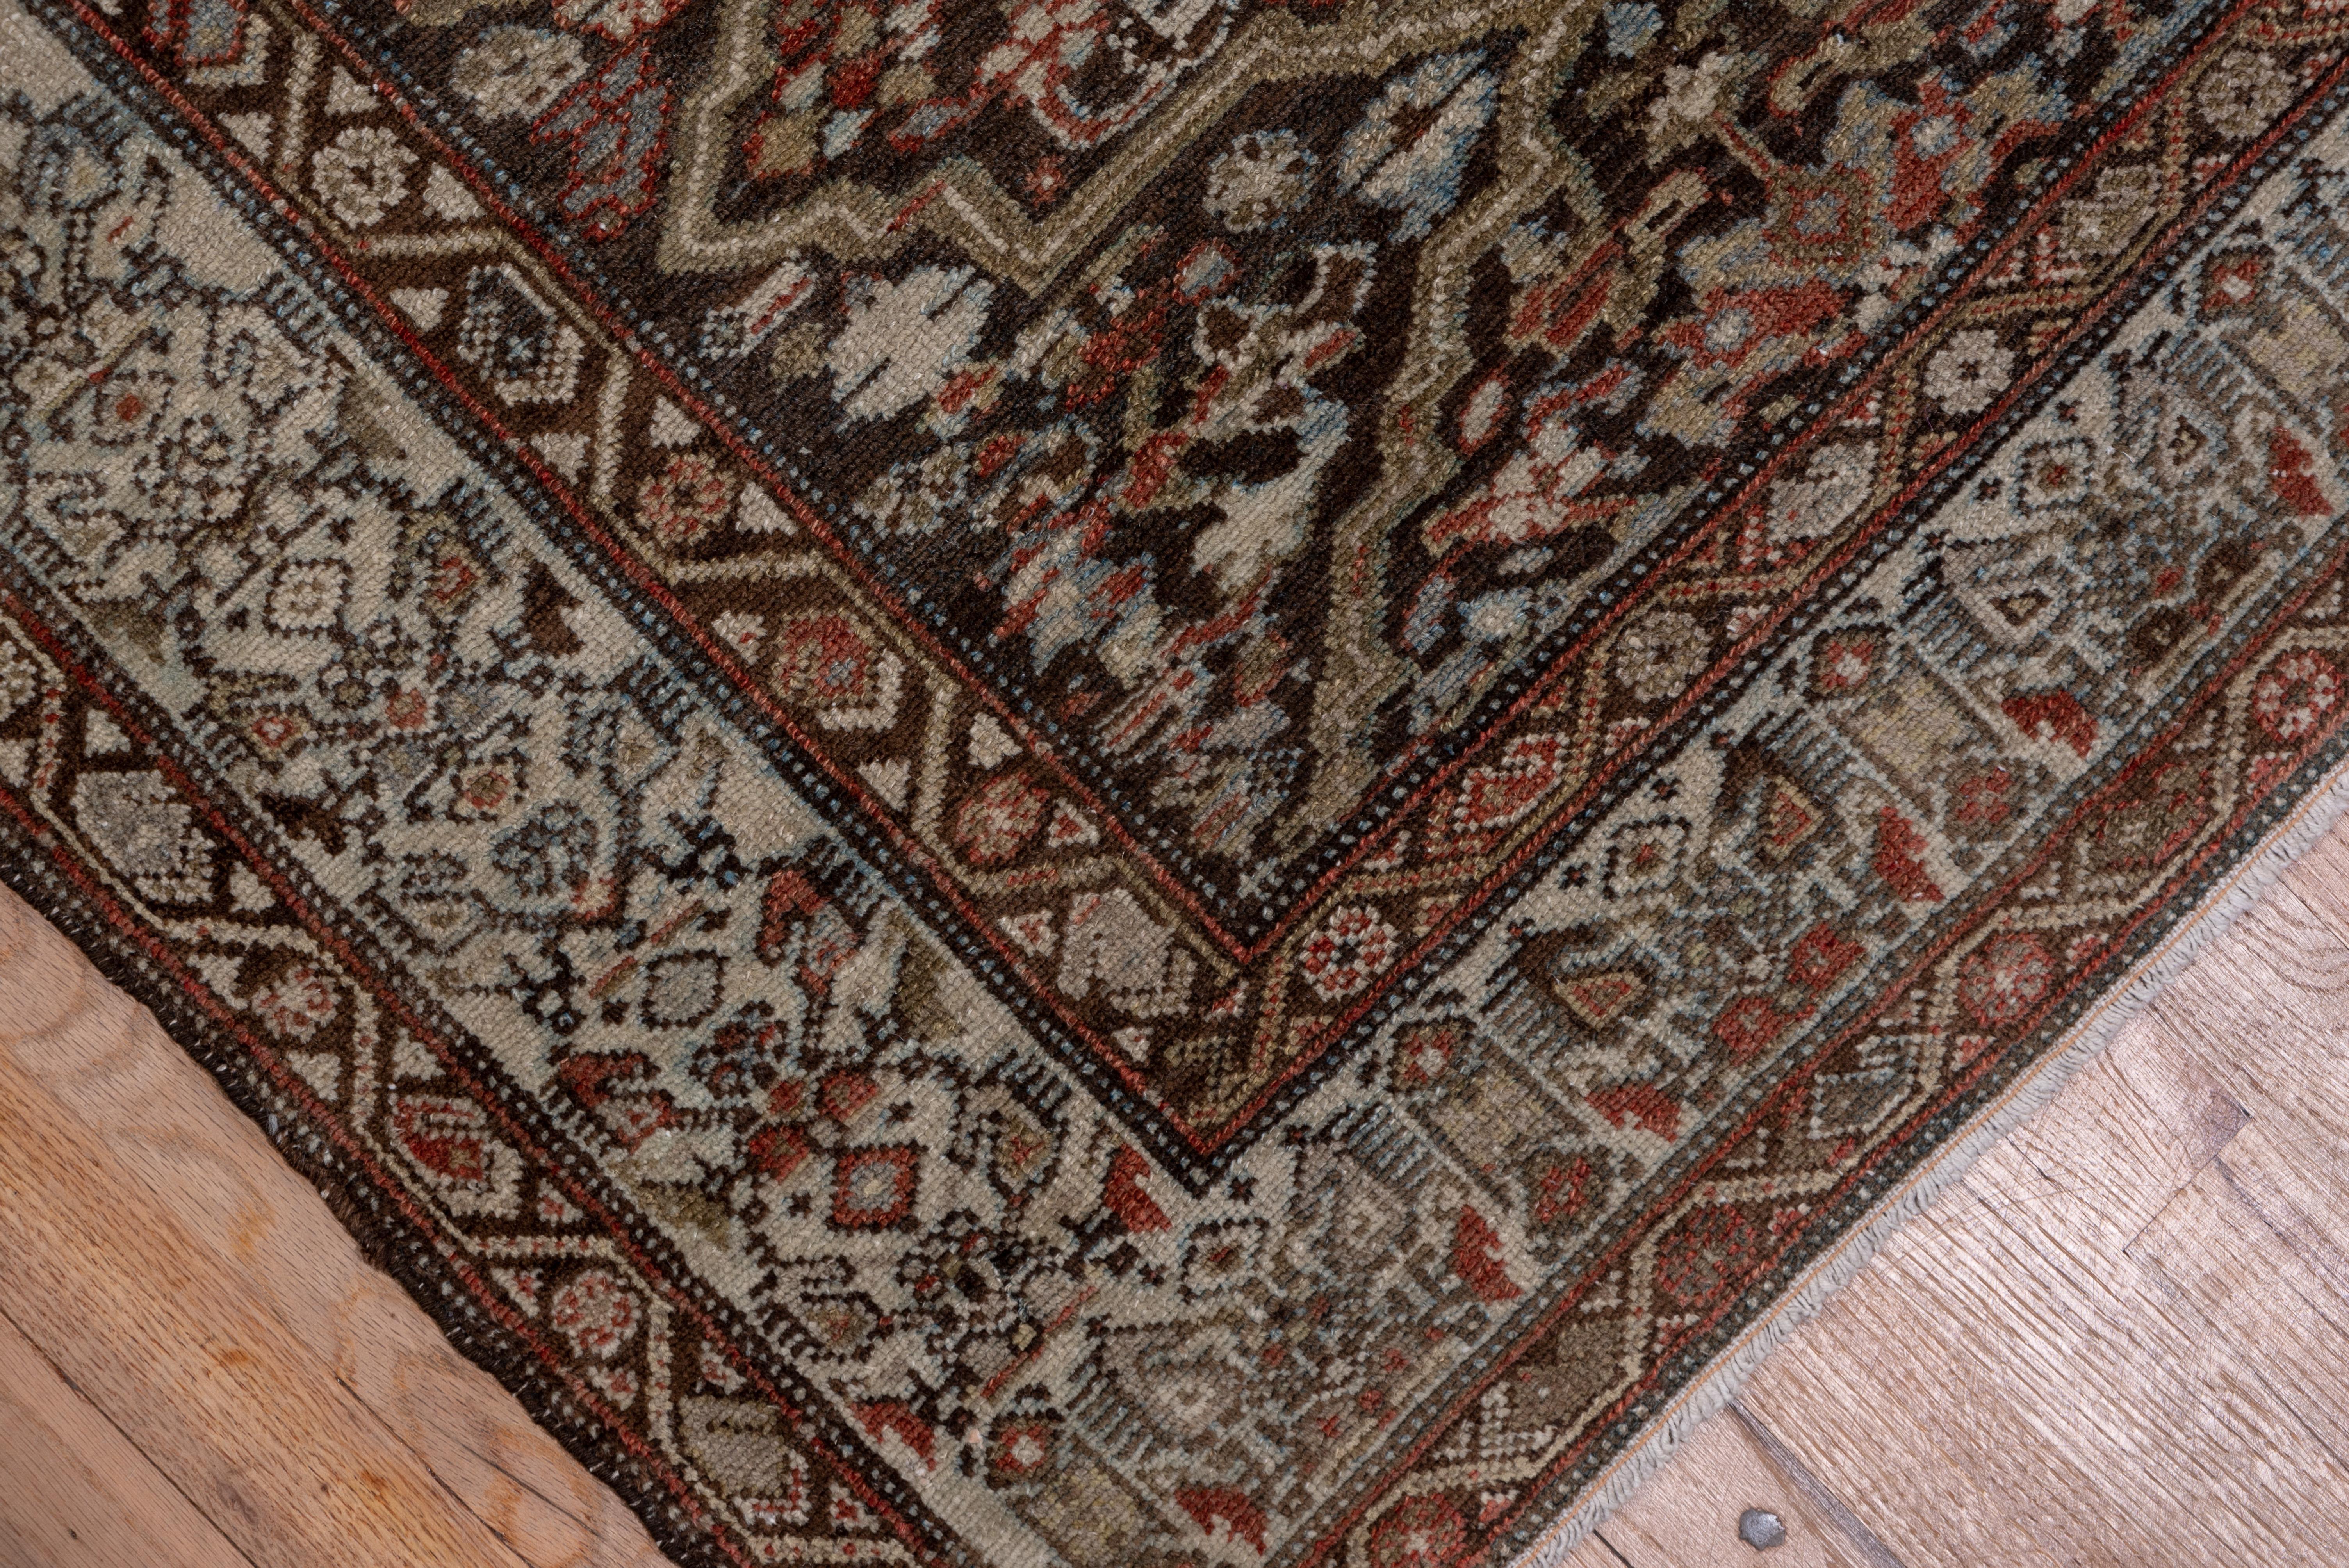 This West Persian runner shows 15 whole barbed lozenge cartouches forming a central pole, each enclosing a rosette, on a dark slate ground, with red, green and ecru accents. Straw border with a unidirectional, modular footed boteh repeat.